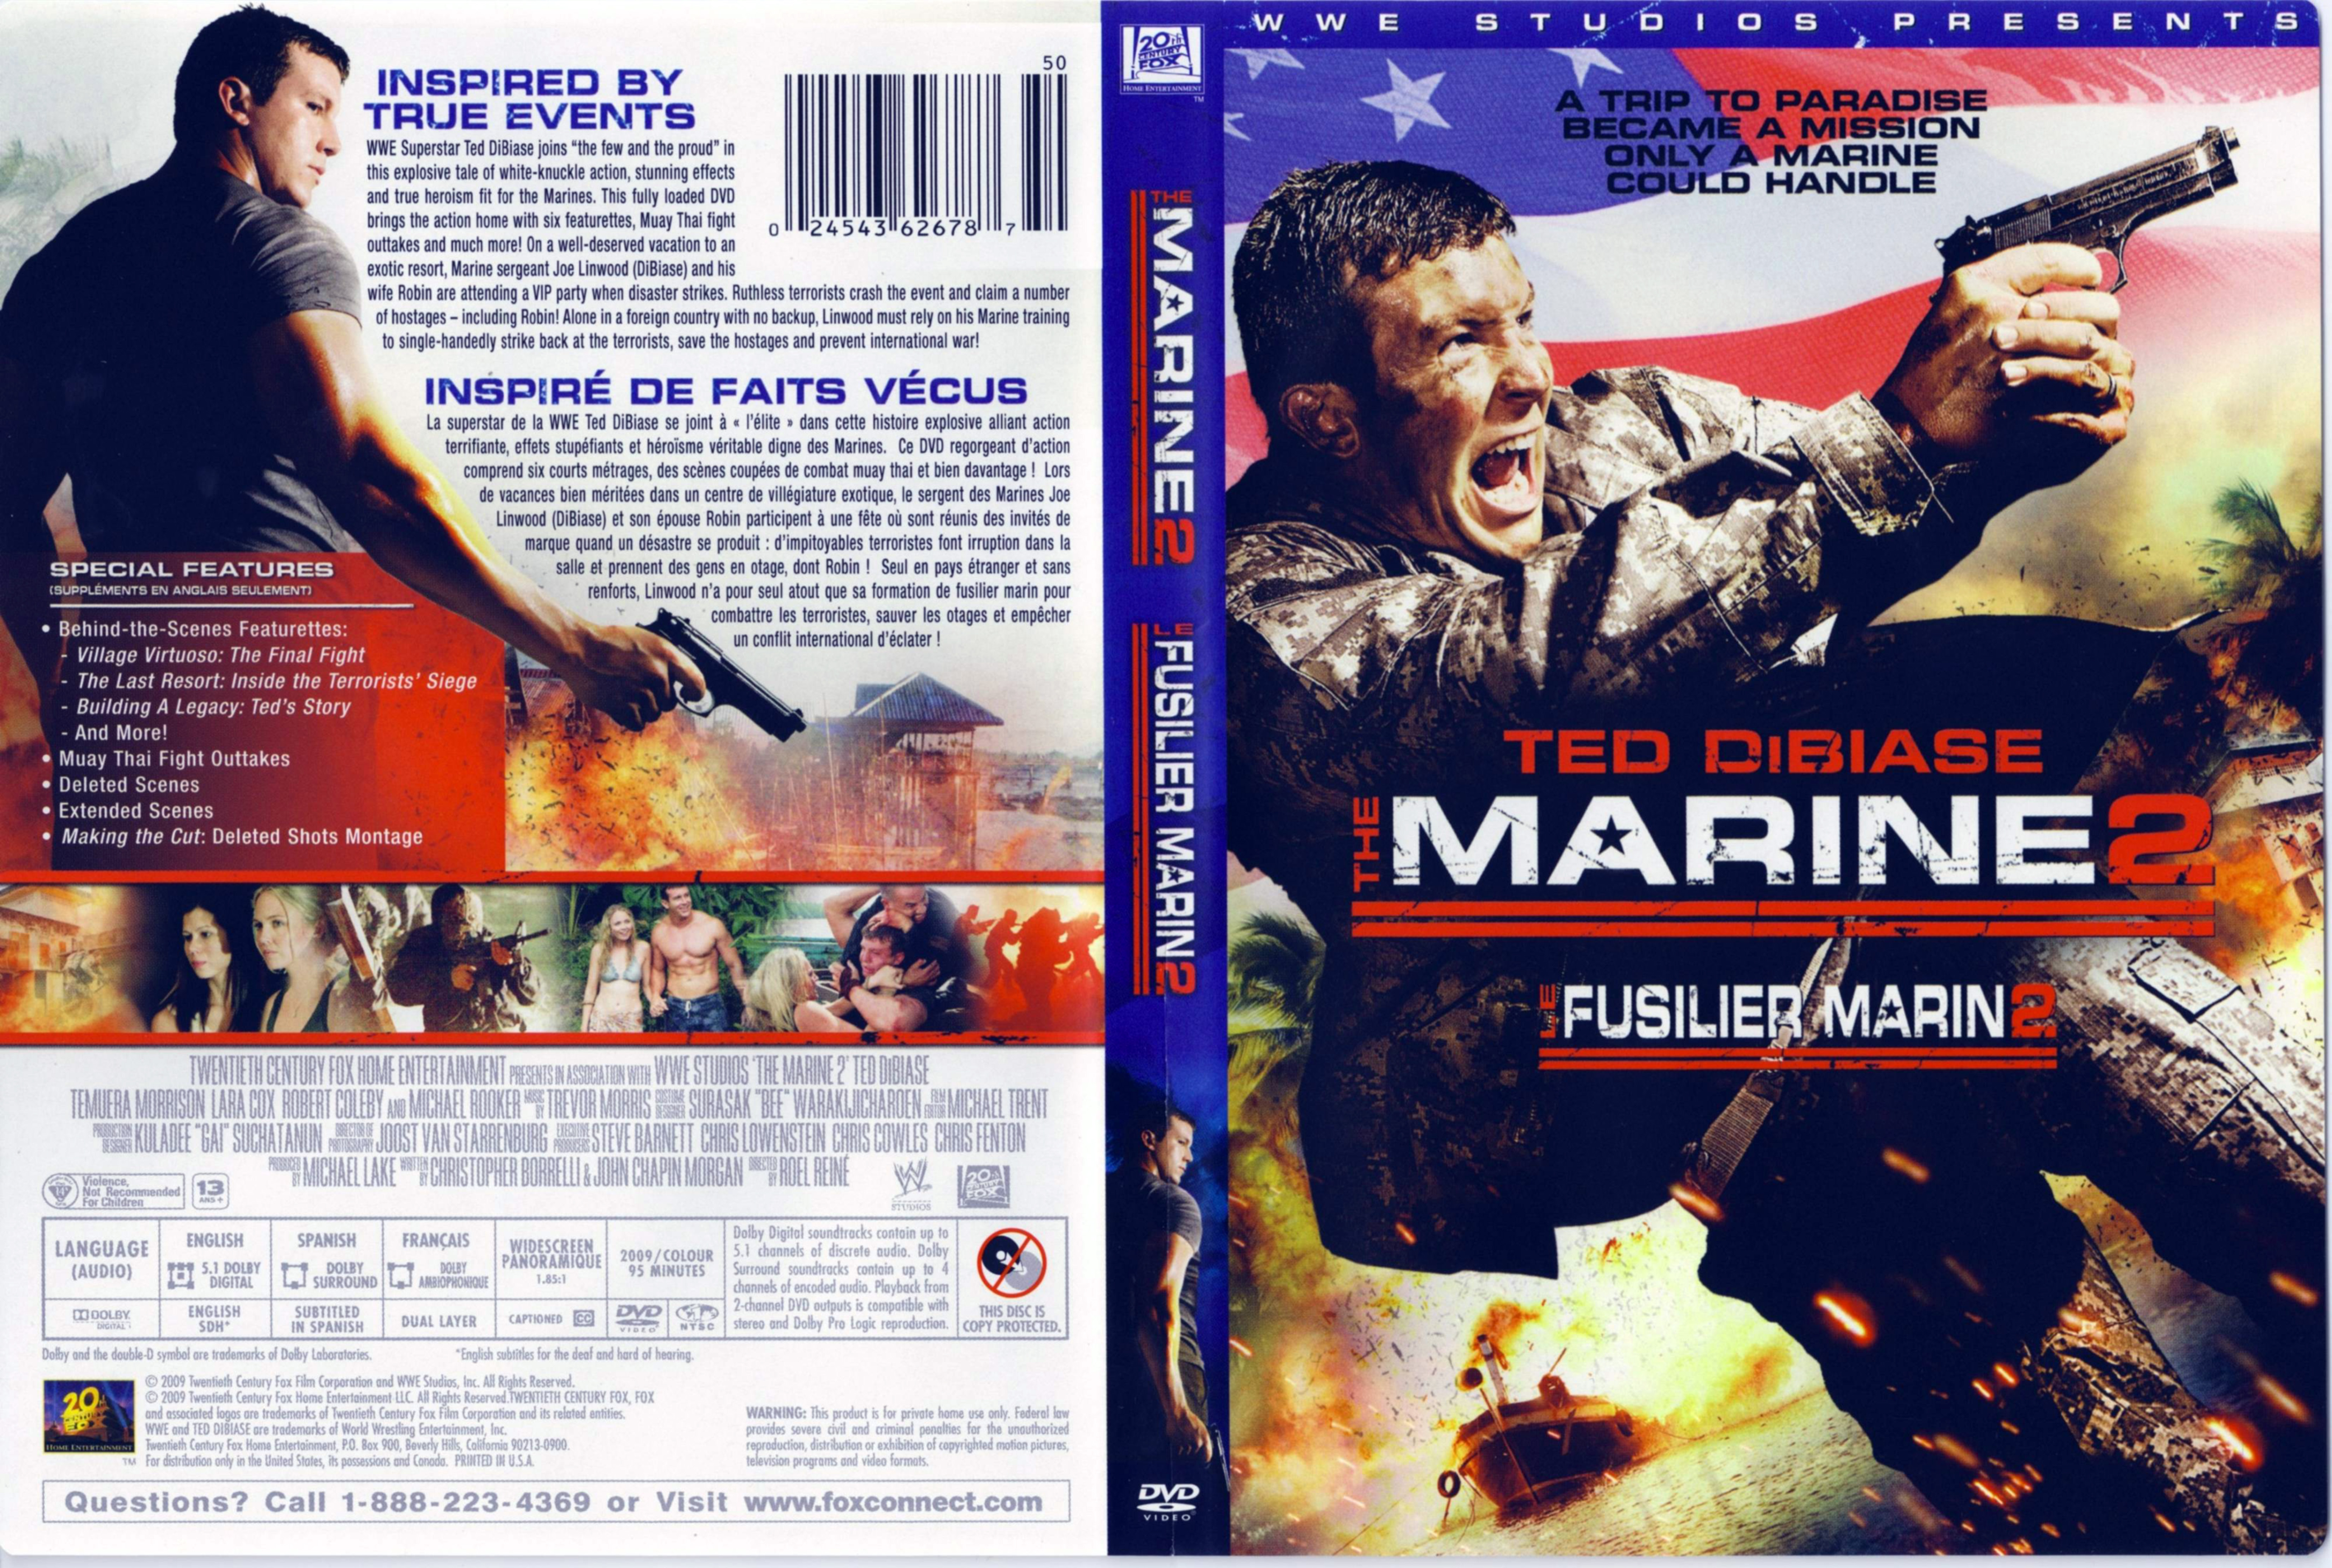 Jaquette DVD The marine 2 - Le fusilier marin 2 (Canadienne)